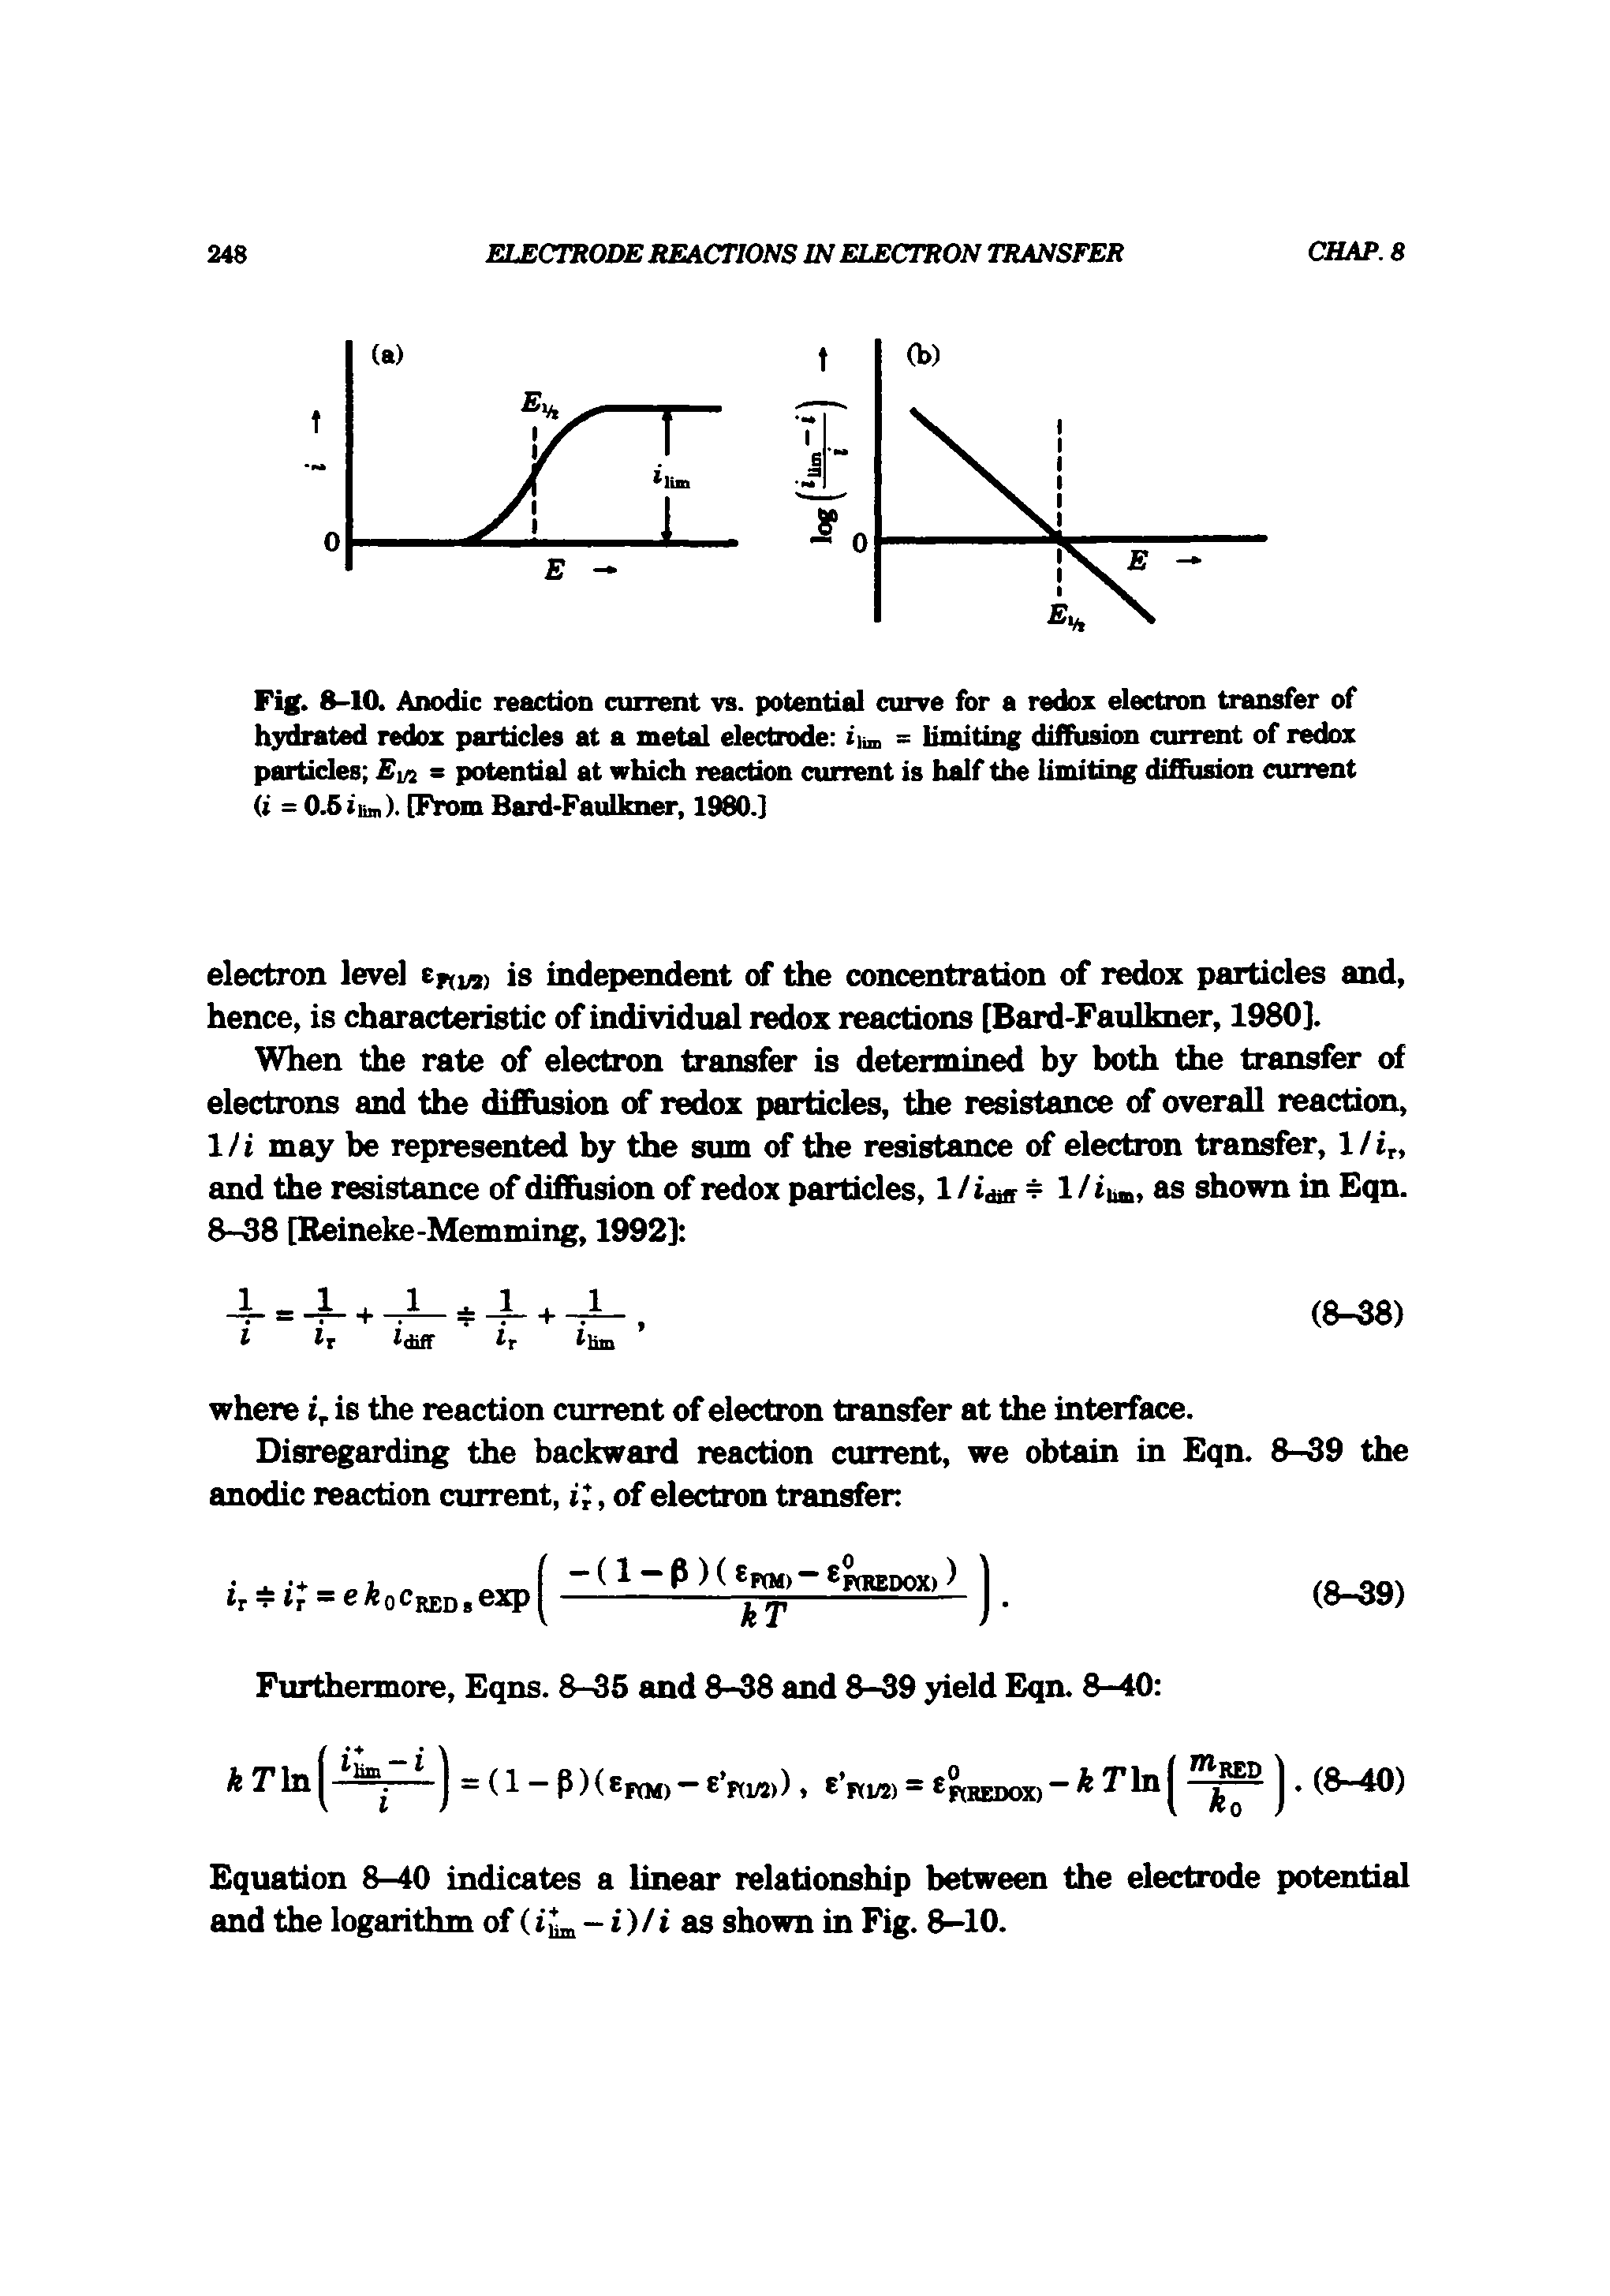 Fig. 8-10. Anodic reaction current vs. potential curve for a redox electron transfer of hydrated redox particles at a metal electrode iibi = limiting diffusion current of redox particles 1/3 = potential at which reaction current is half the limiting diffusion current ( = 0.6iiin). [From Bard-Paulkner, 1980.]...